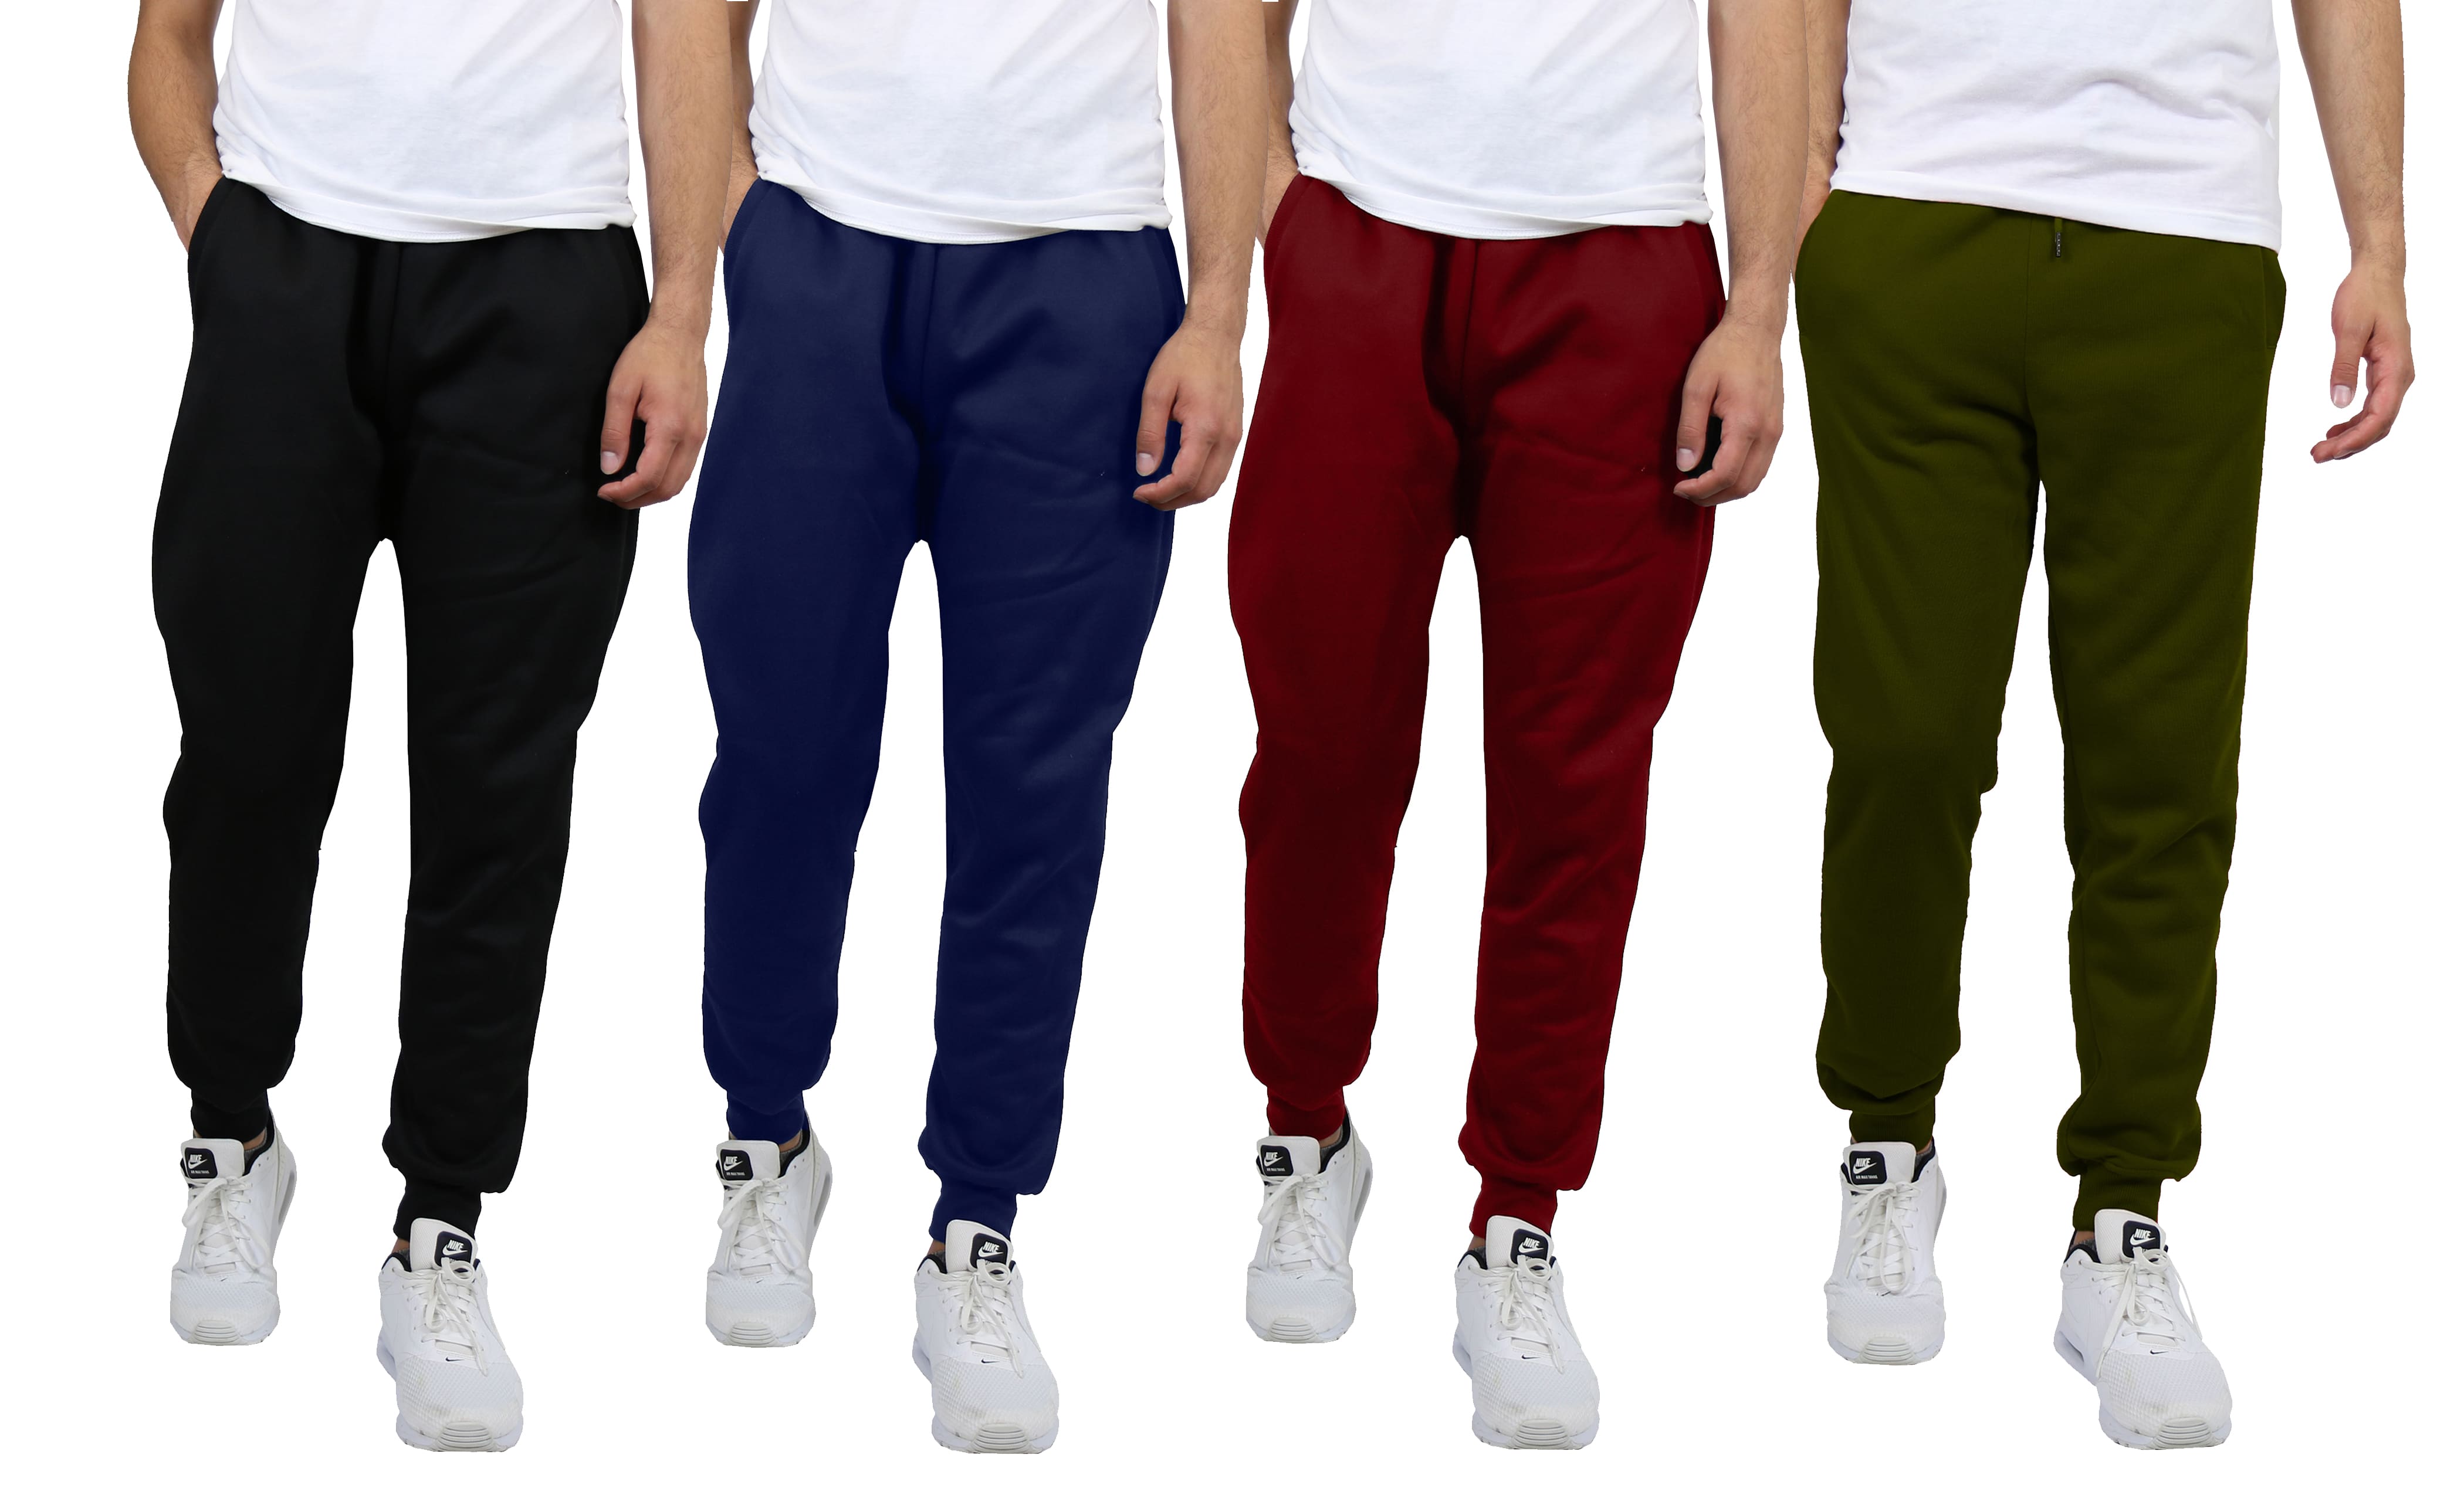 Galaxy by Harvic Men's Fleece-Lined Jogger Sweatpants 4 Pack